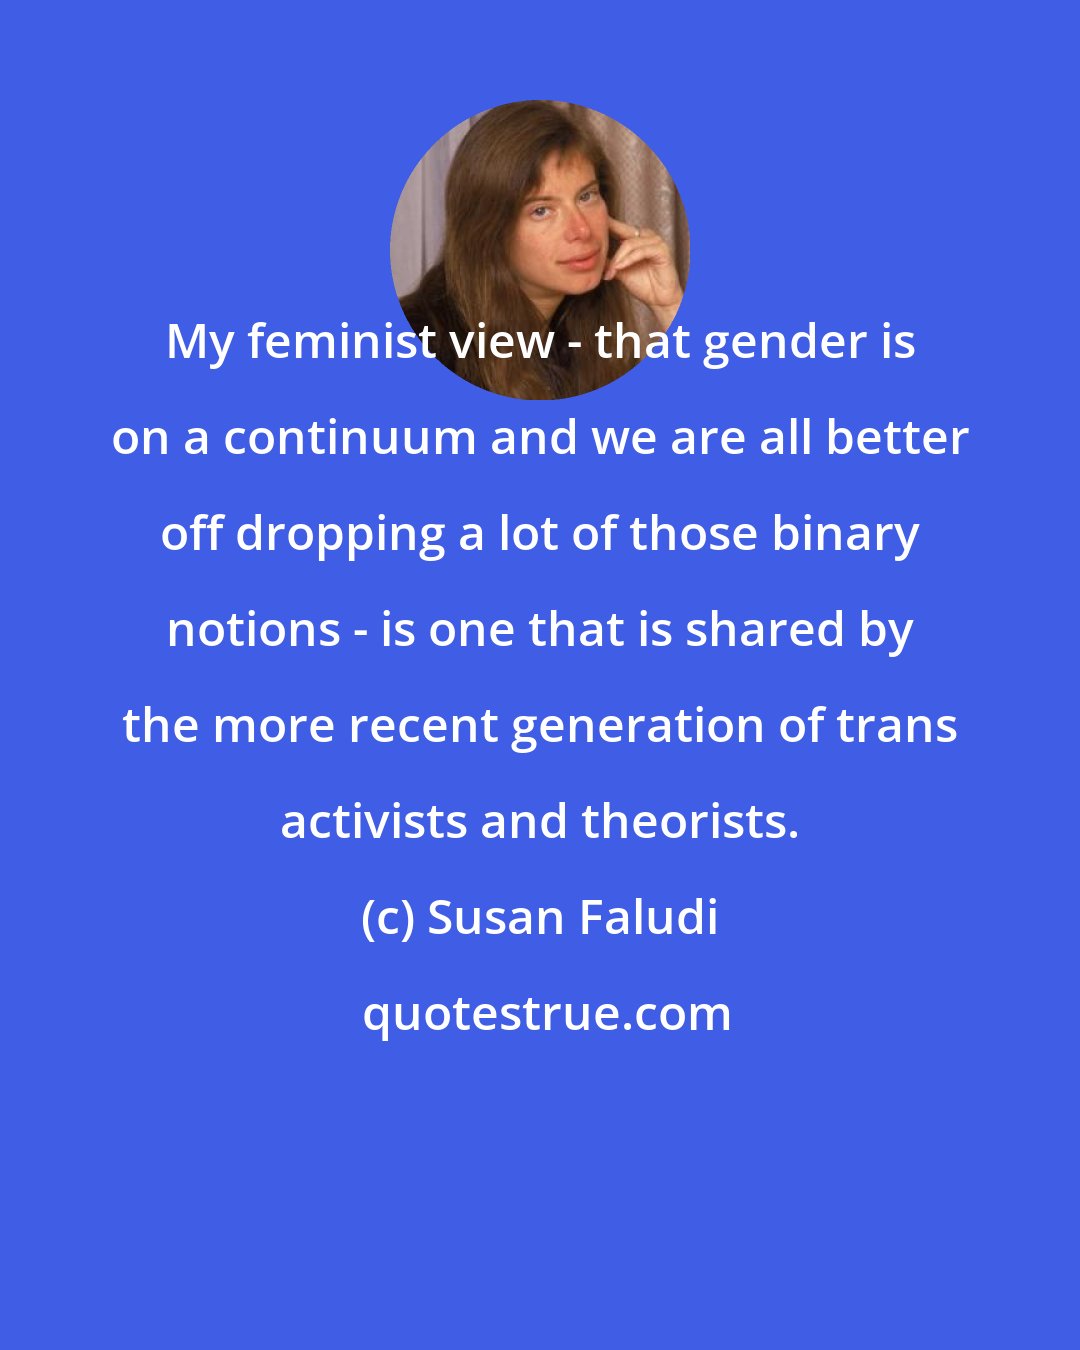 Susan Faludi: My feminist view - that gender is on a continuum and we are all better off dropping a lot of those binary notions - is one that is shared by the more recent generation of trans activists and theorists.